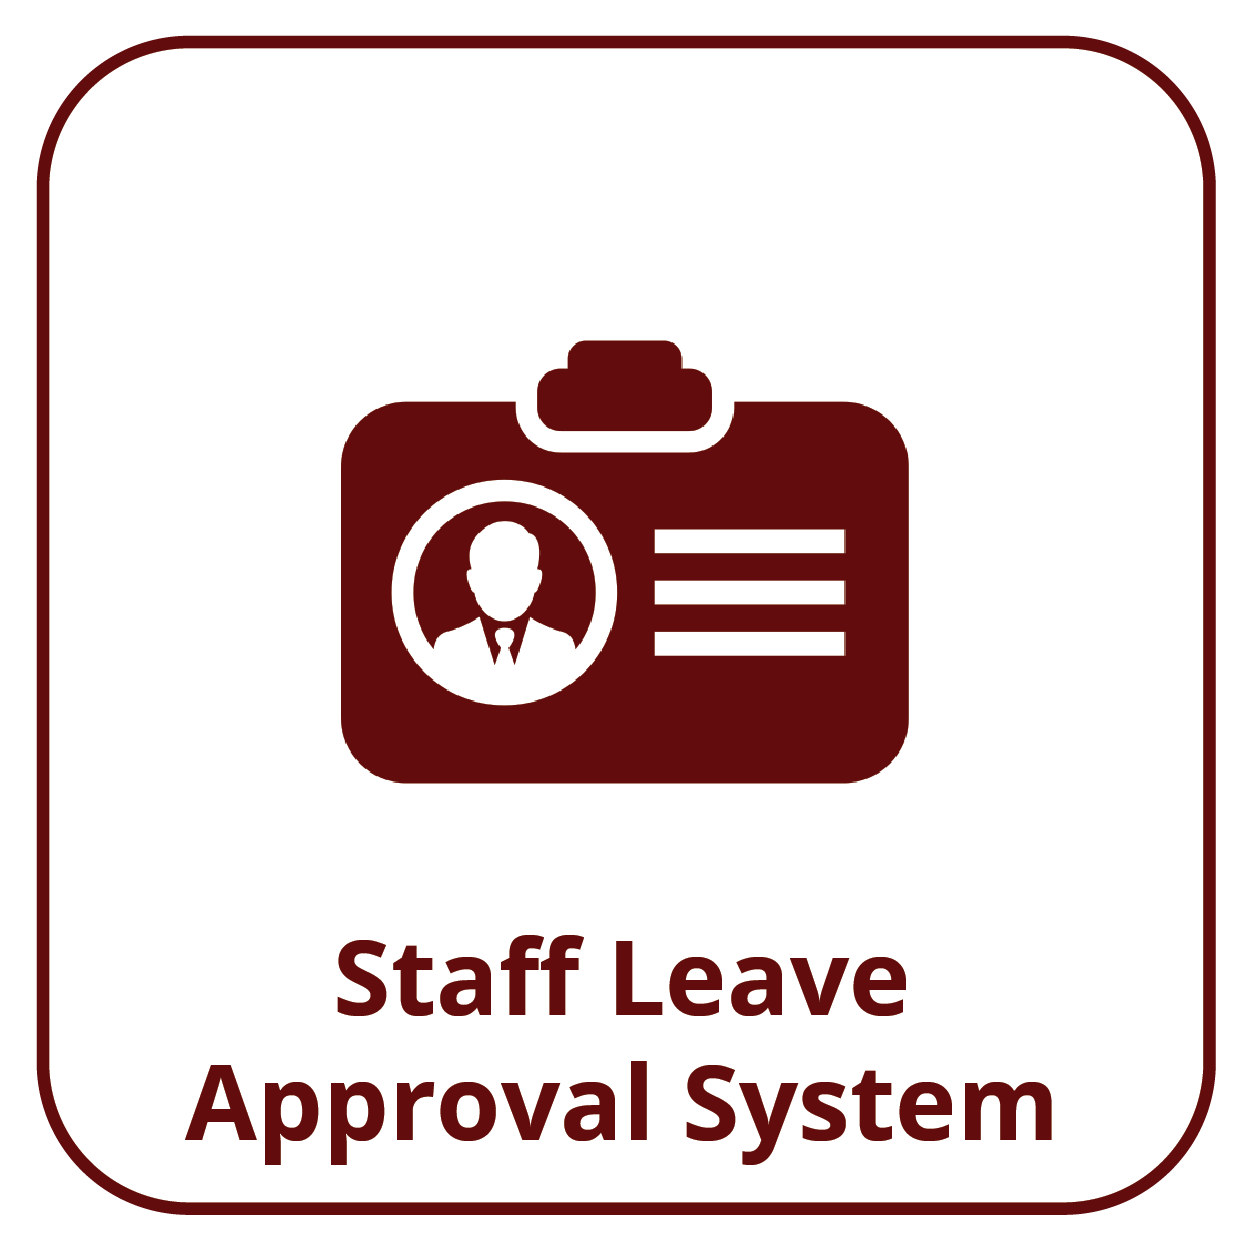 Button of Staff Leave AS